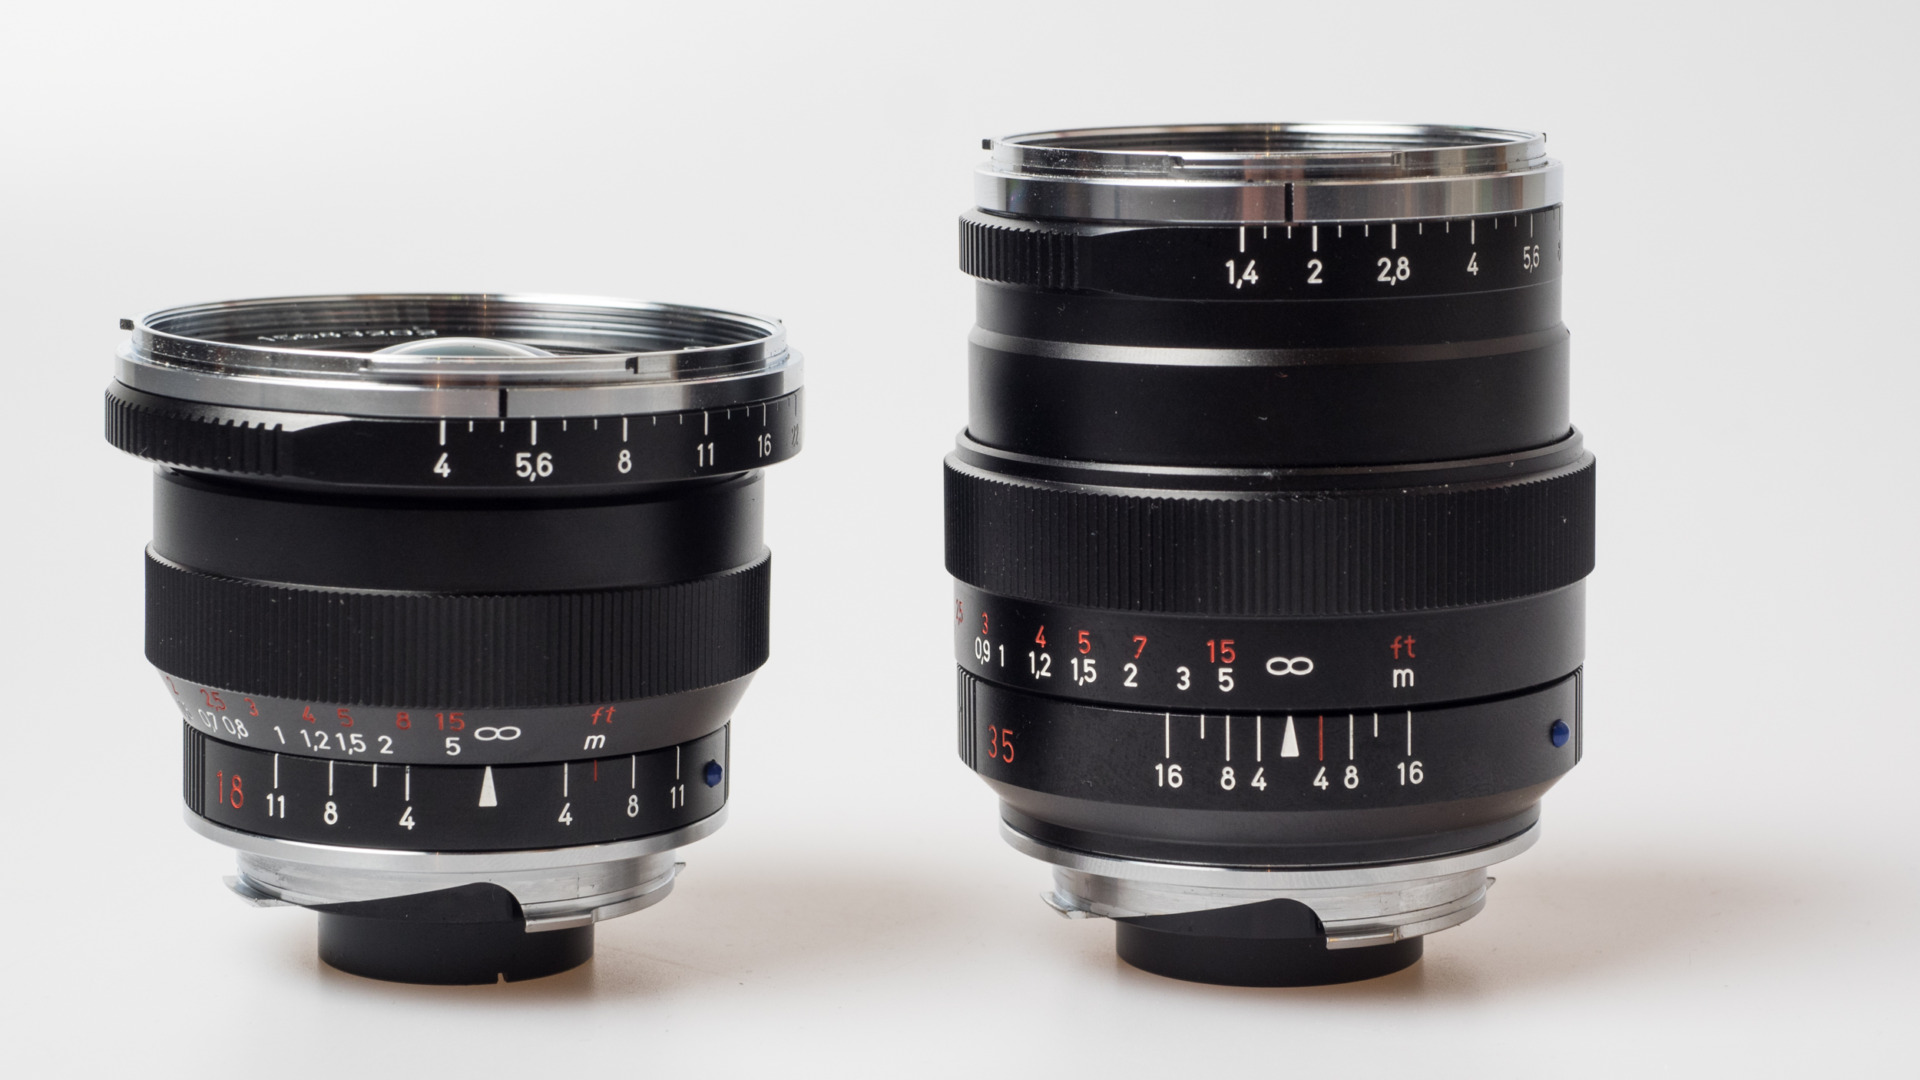 Two Distagon wide angle lenses for Leica M-mount: The 18/4 (left) and the 35/1.4 (right) from Zeiss are both very interesting options for rangefinder users